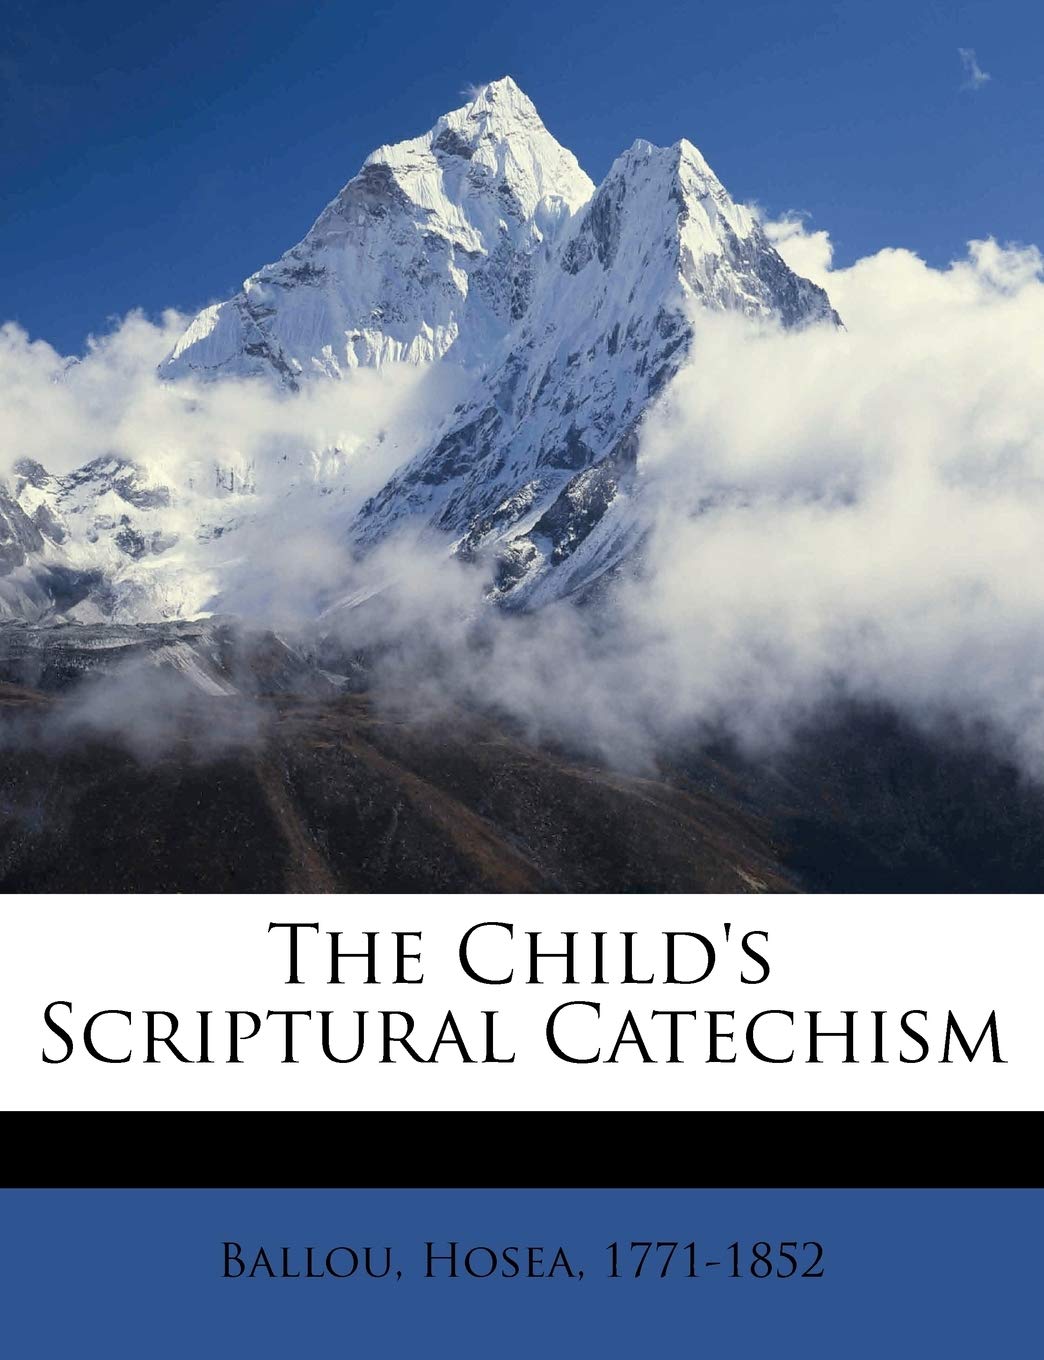 The Child's Scriptural Catechism